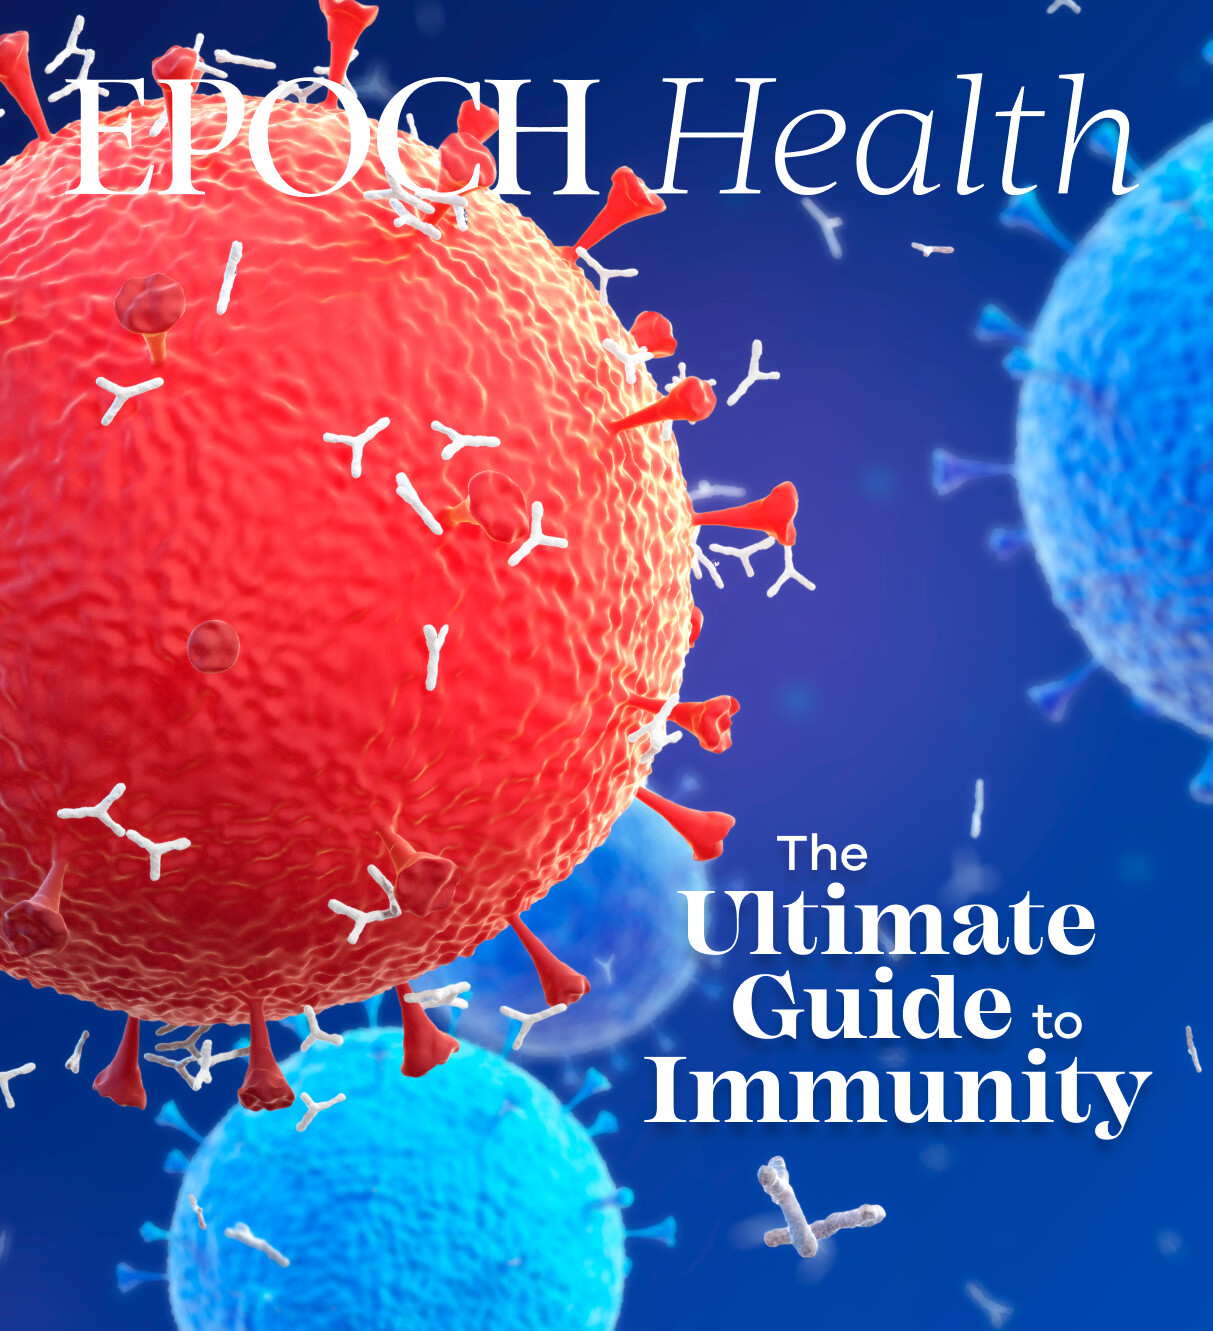 The Ultimate Guide to Immunity